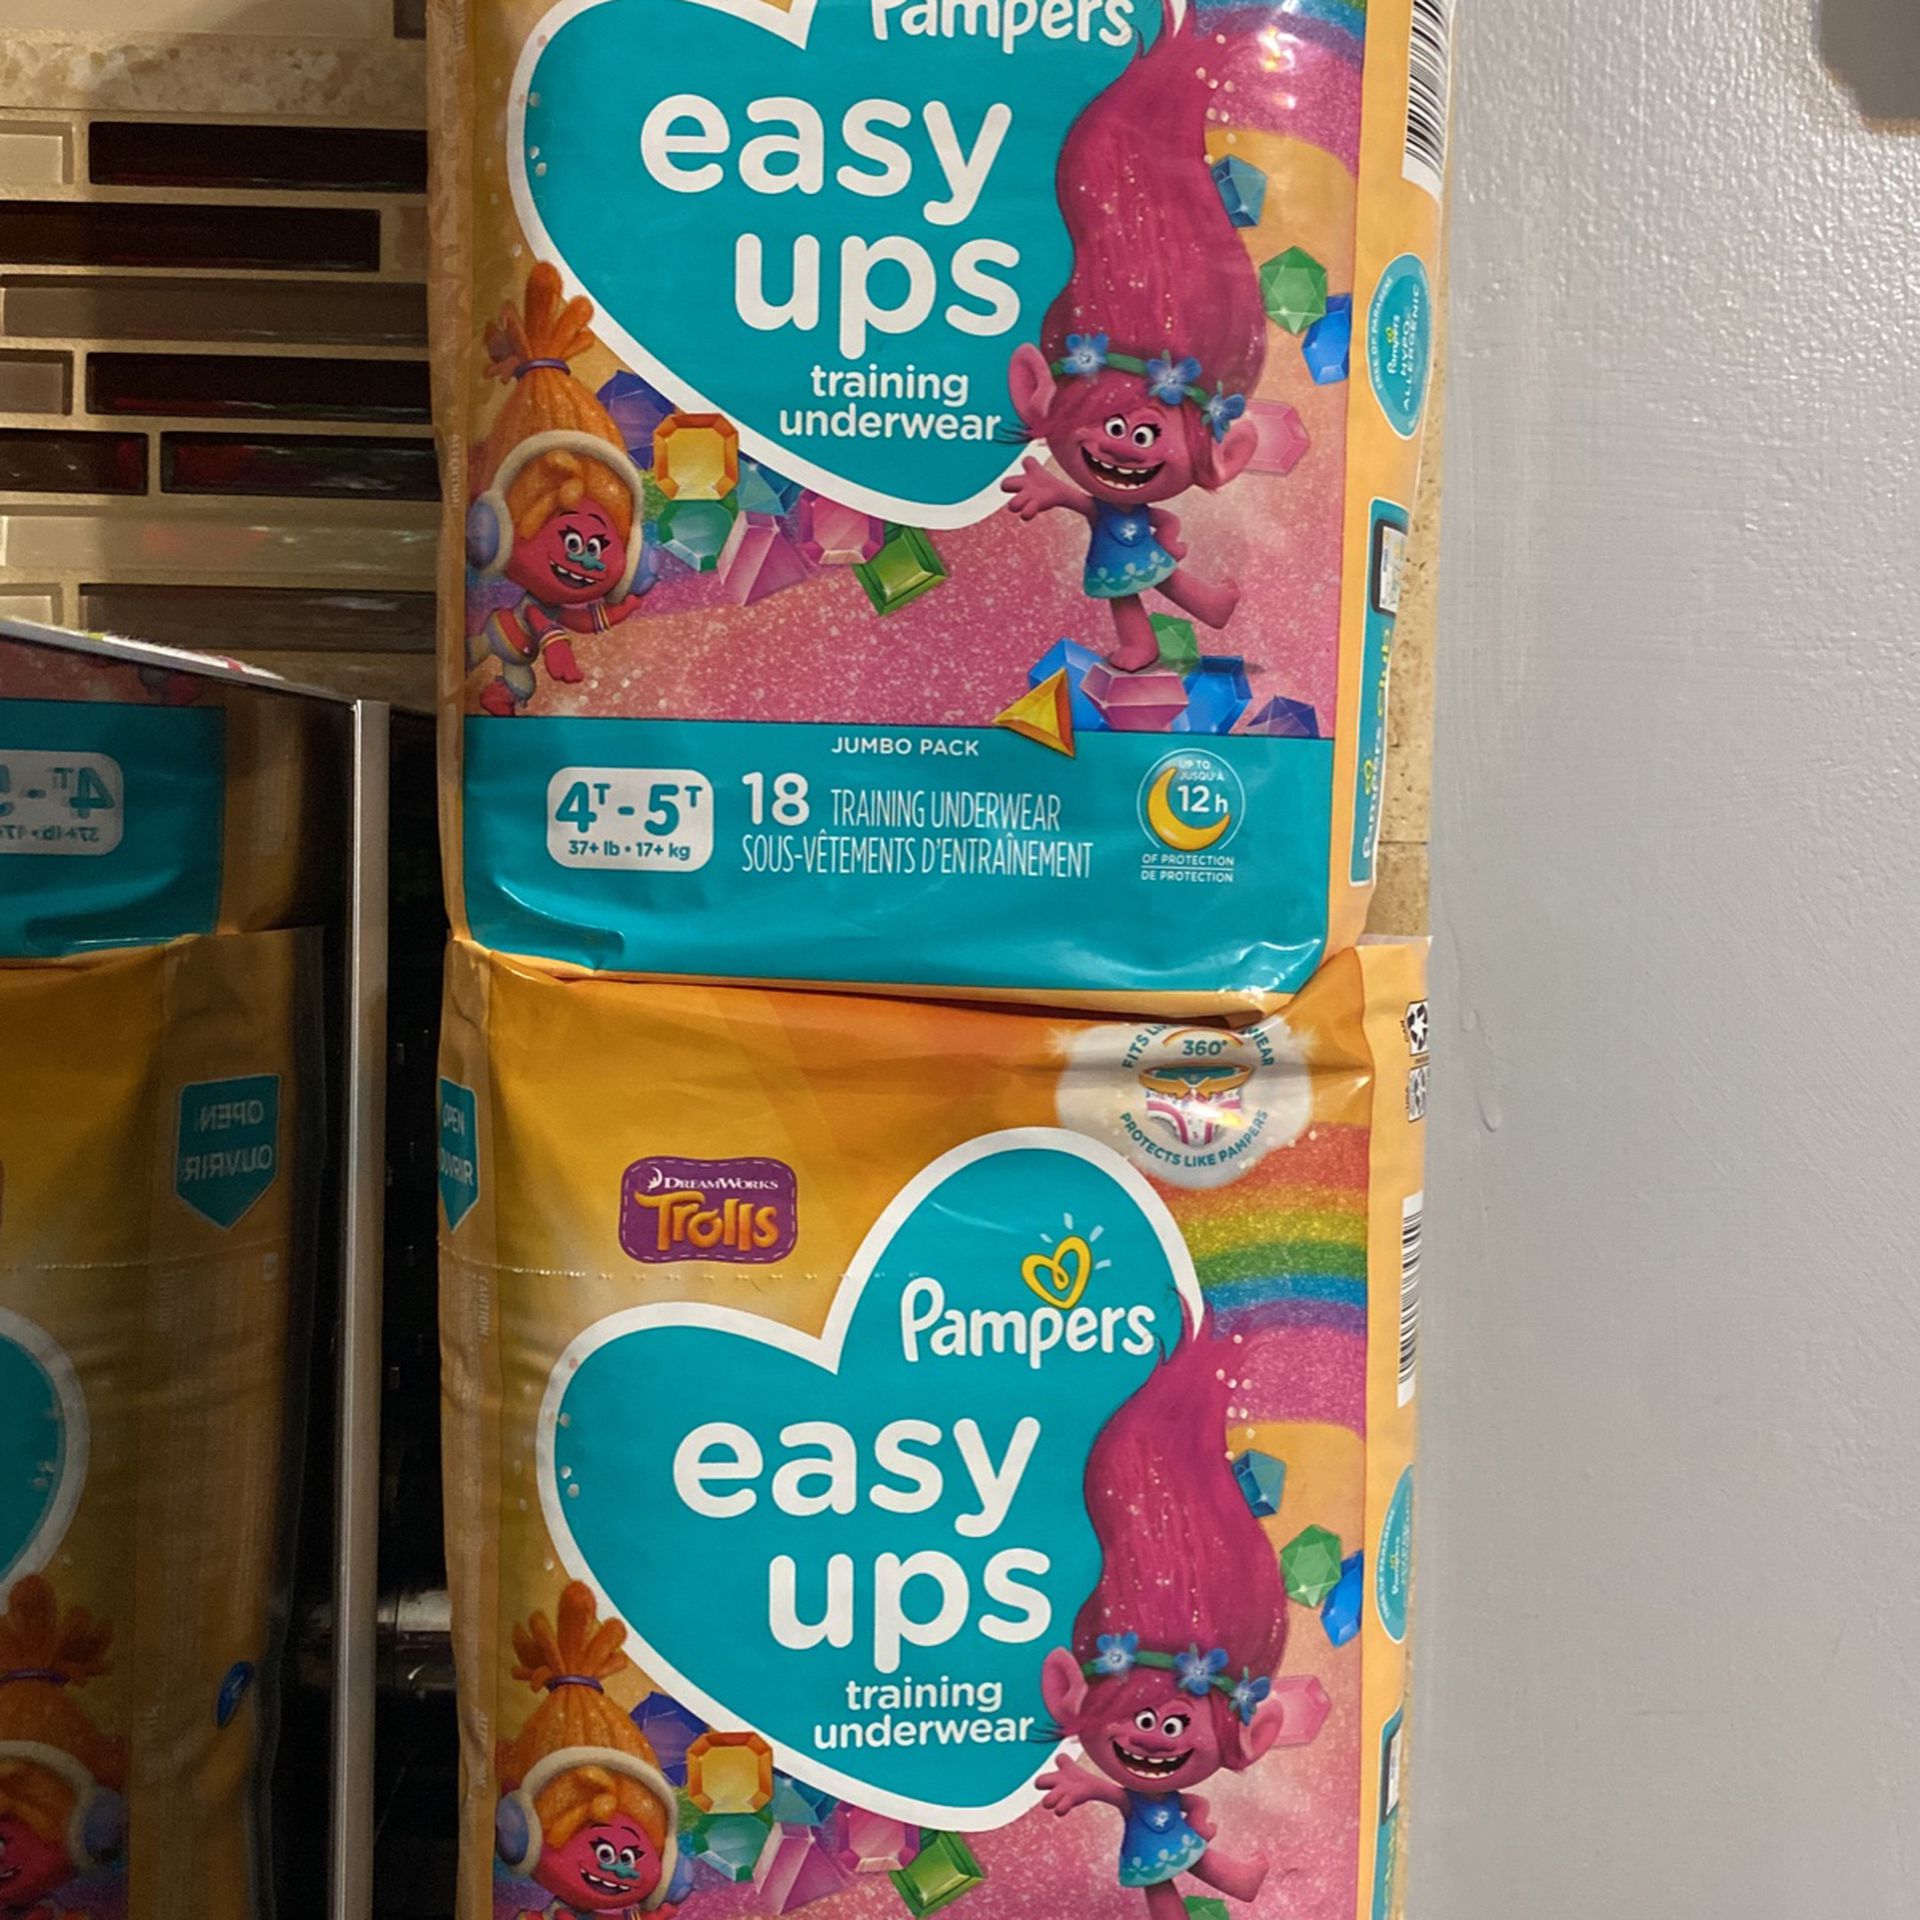 👧🏻PAMPERS EASY UPS👧🏻